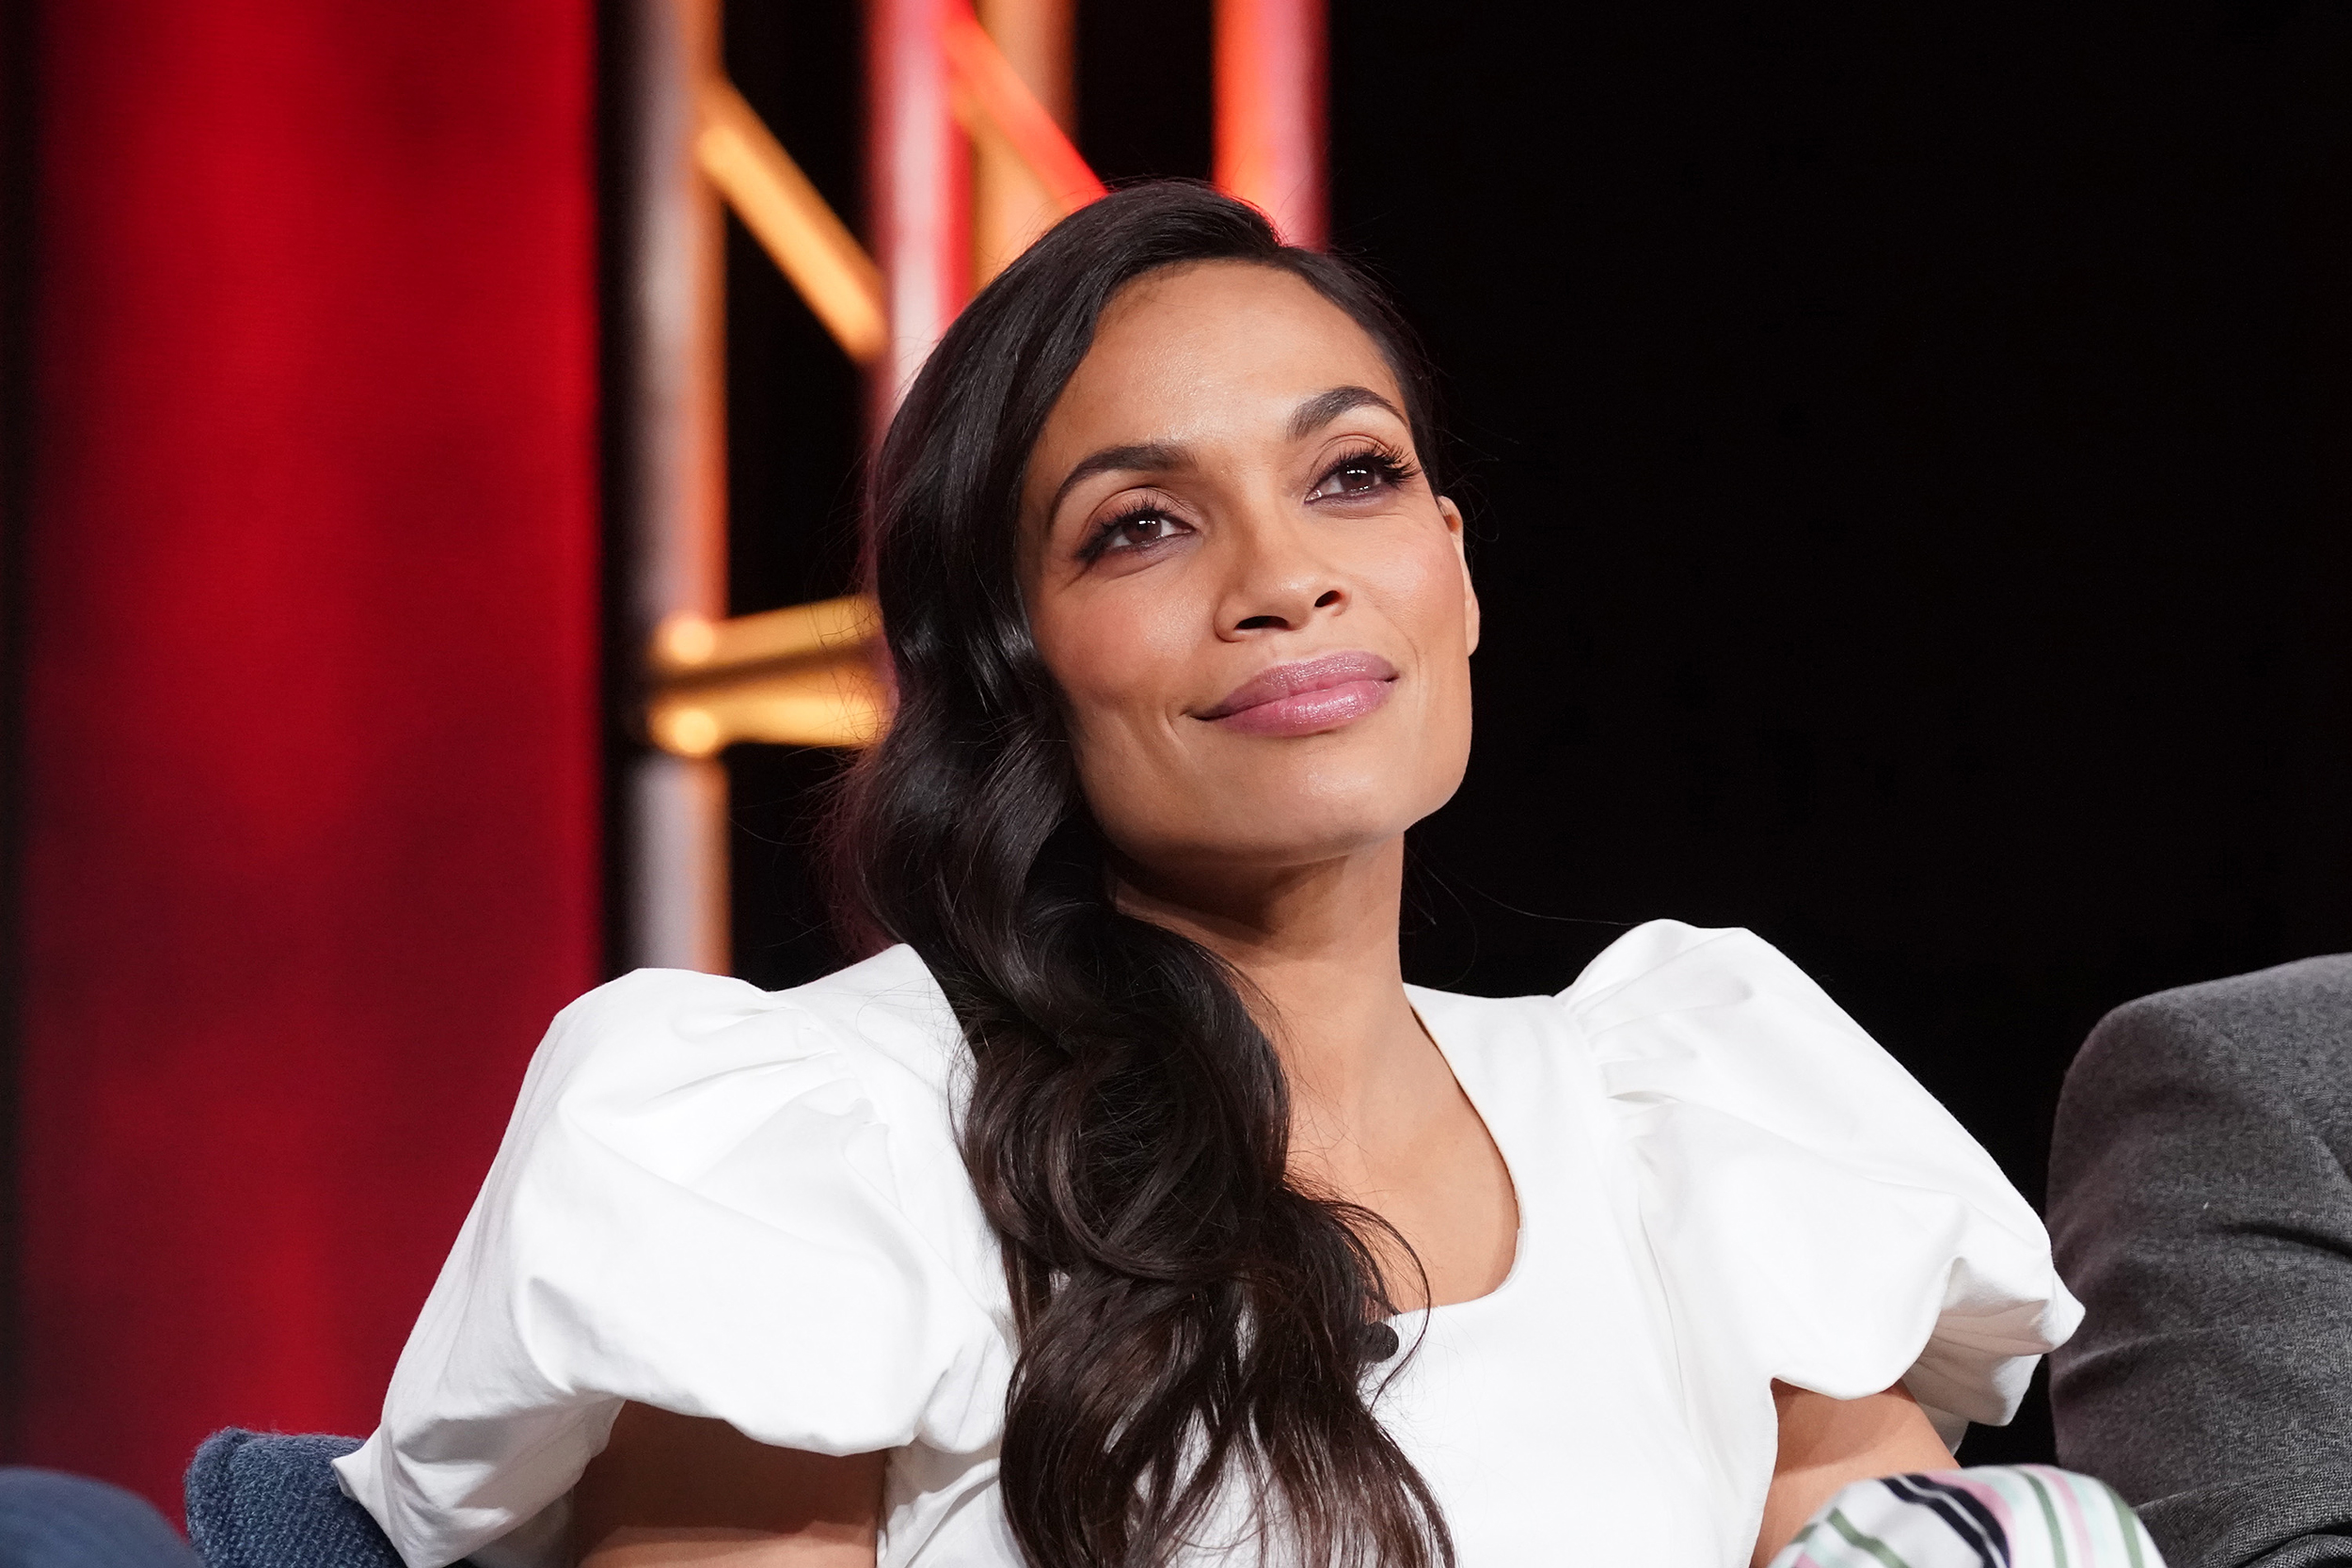 Rosario Dawson officially comes out as LGBTQ in latest interview